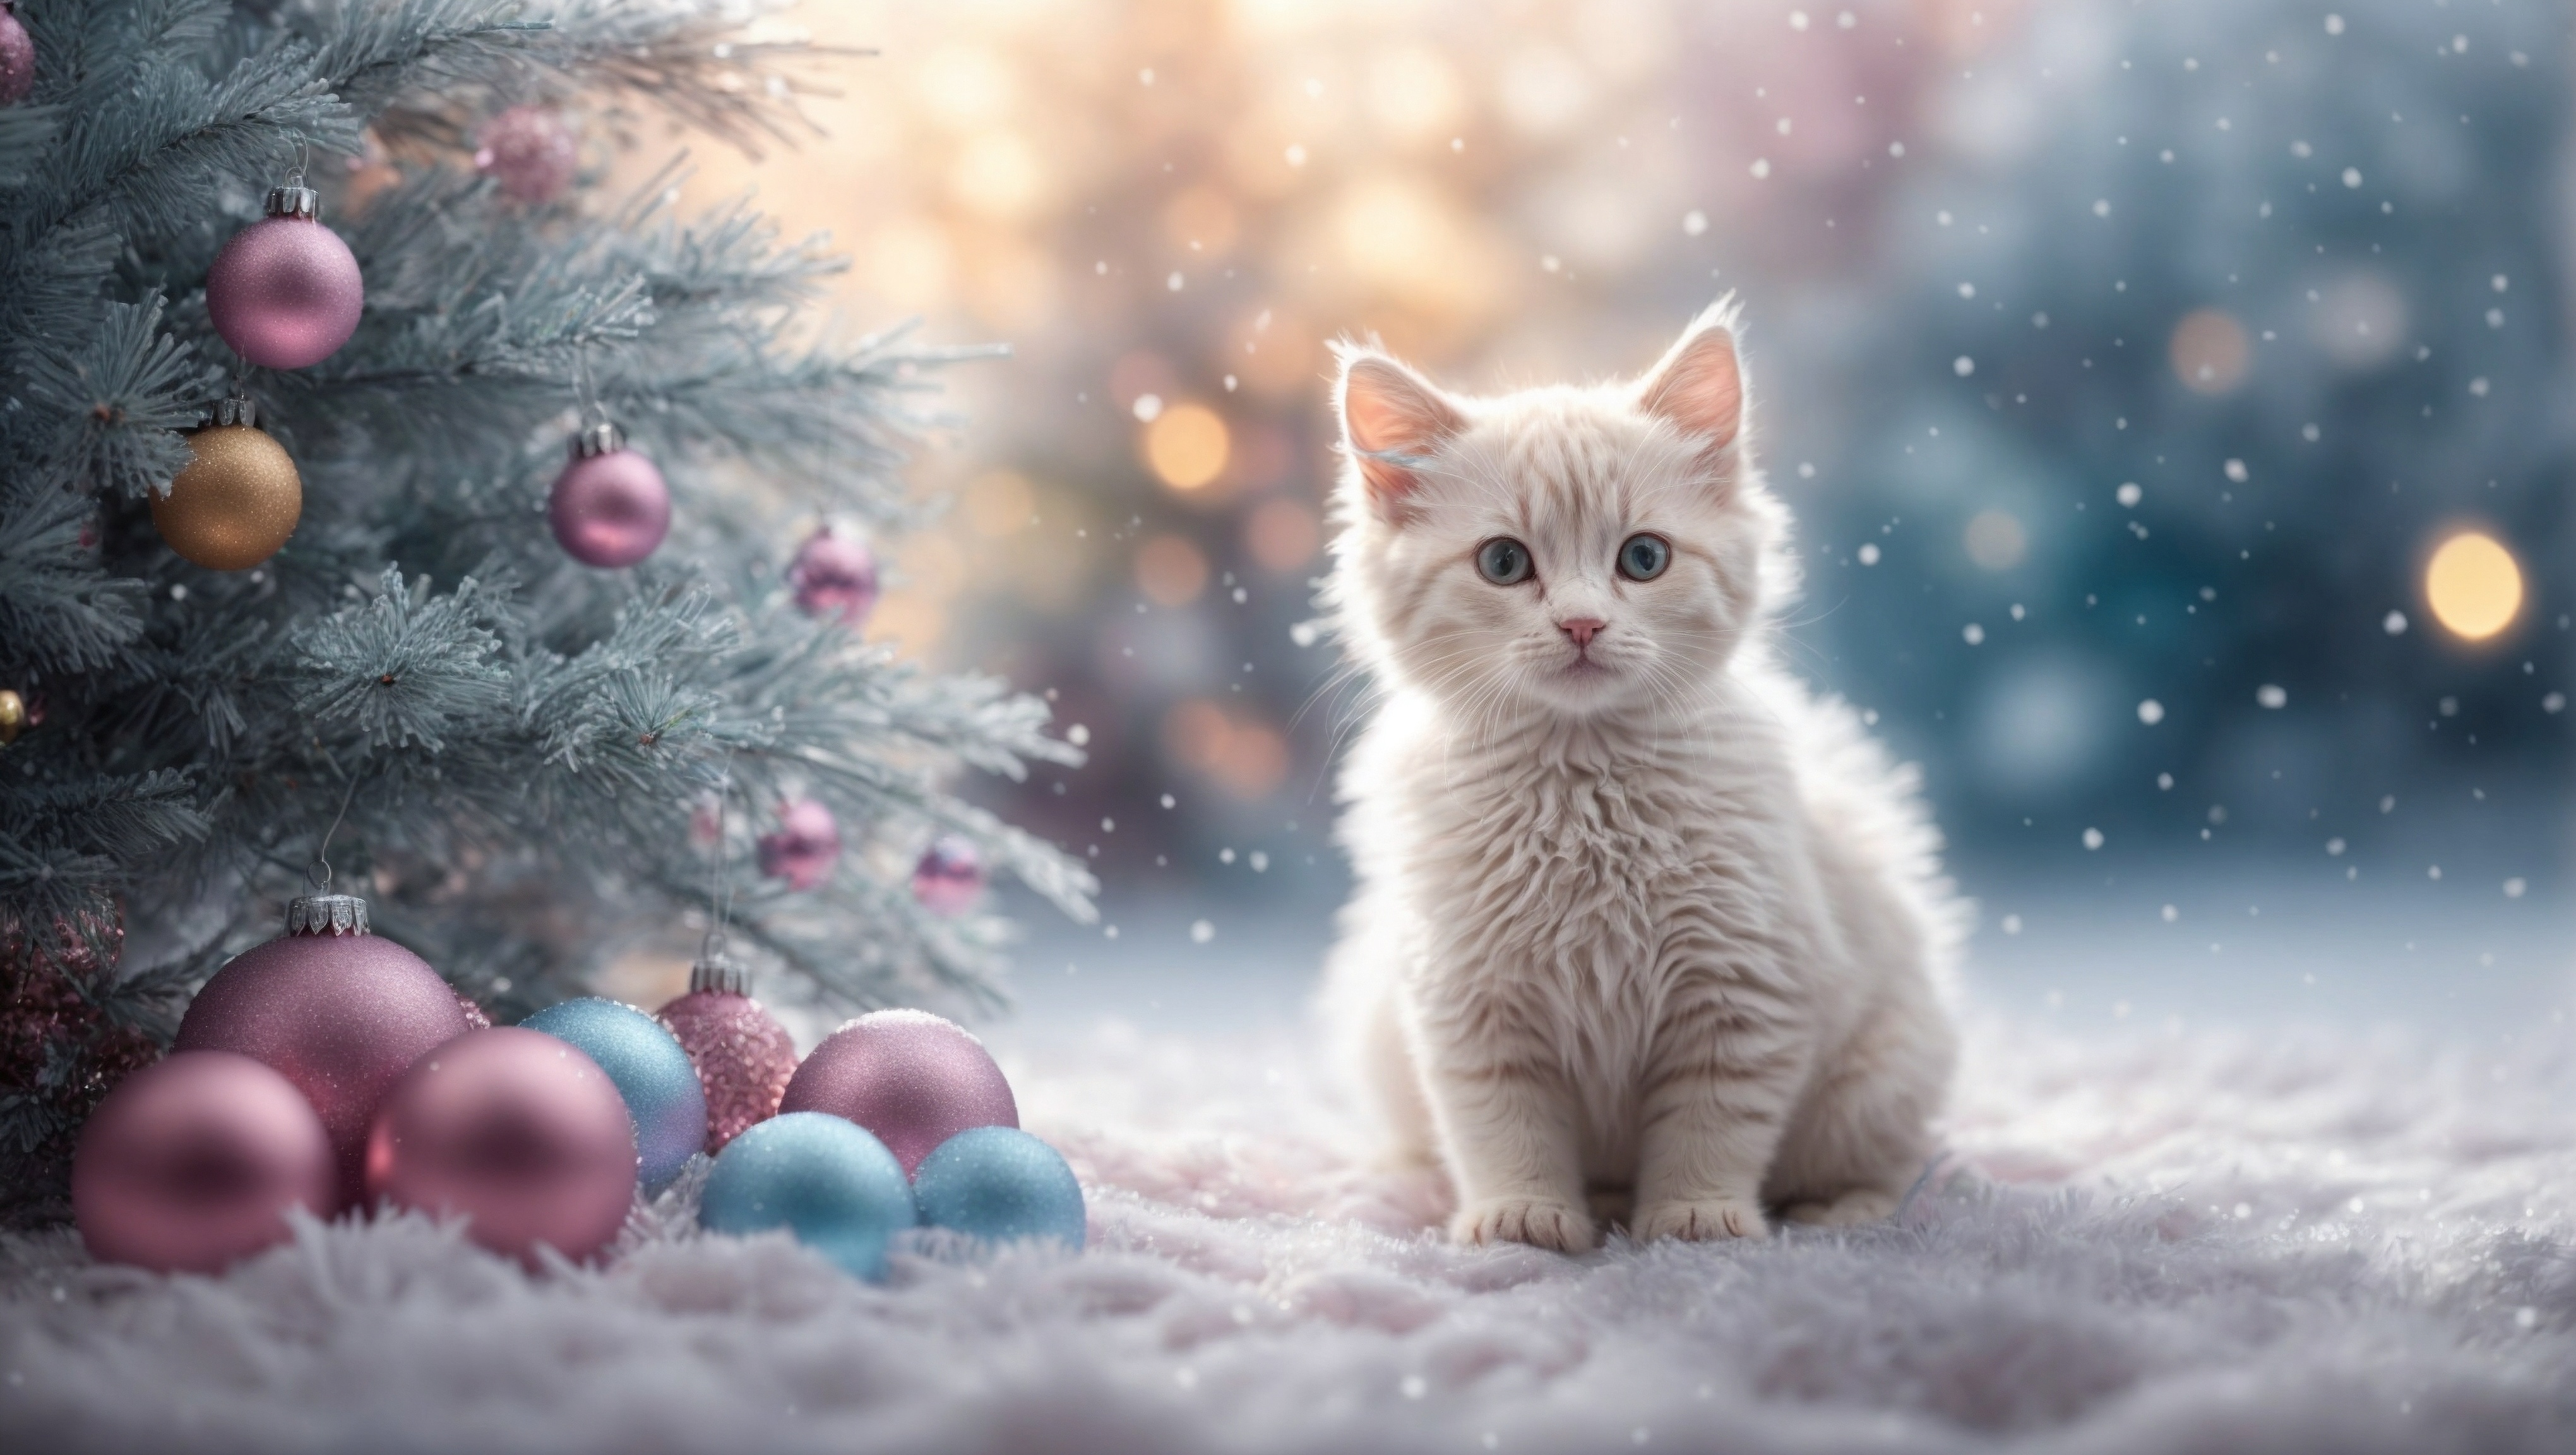 Free photo A cat sits next to a Christmas tree